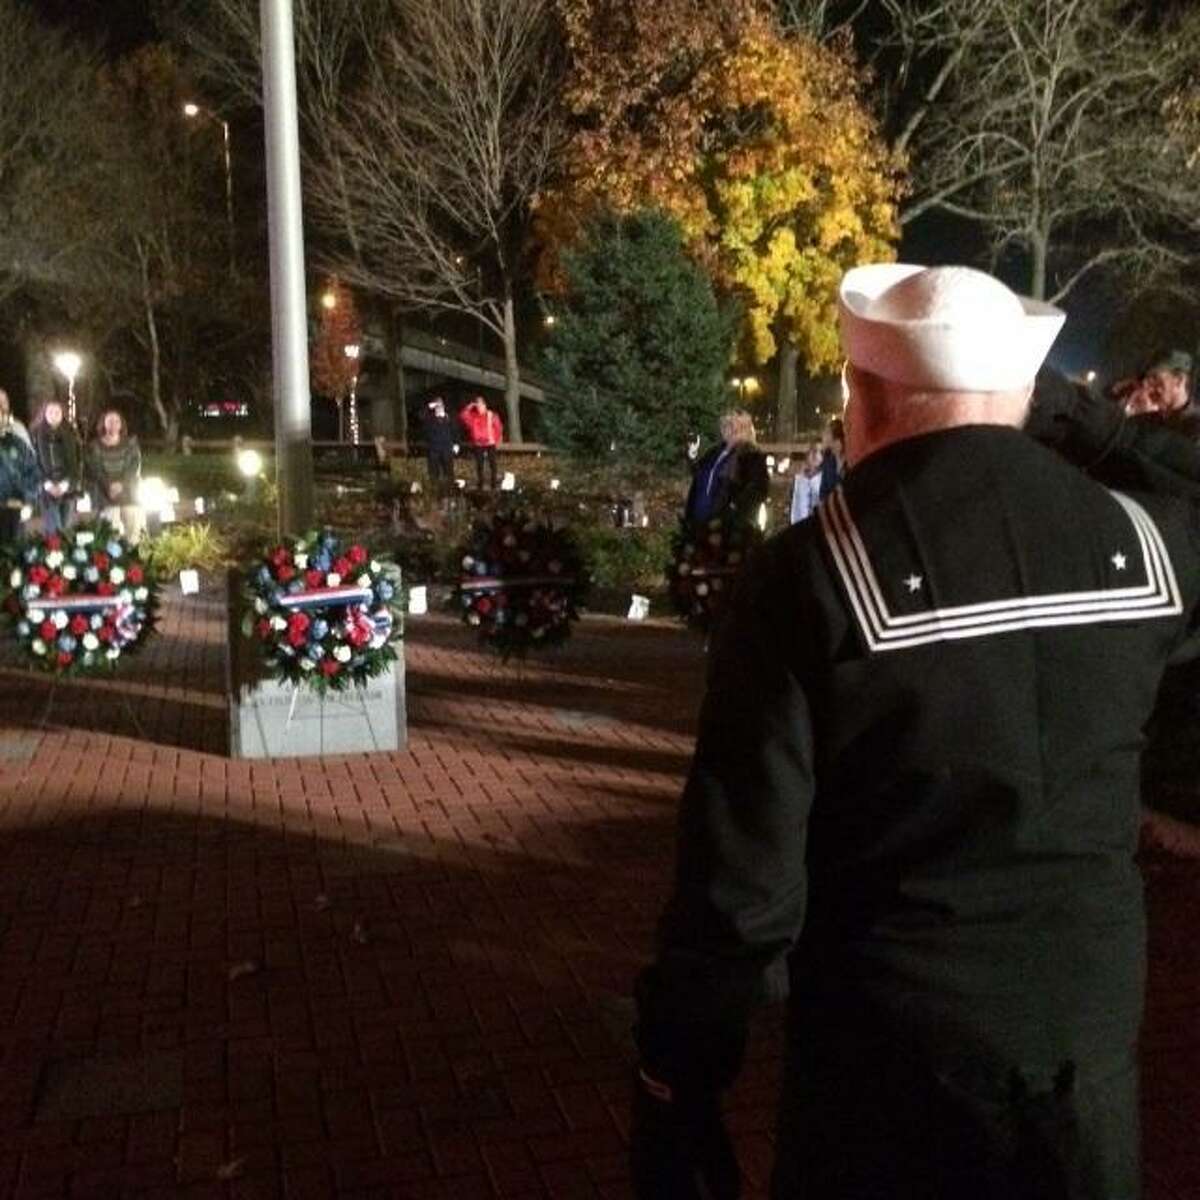 Veterans are honored at a vigil in Seymour